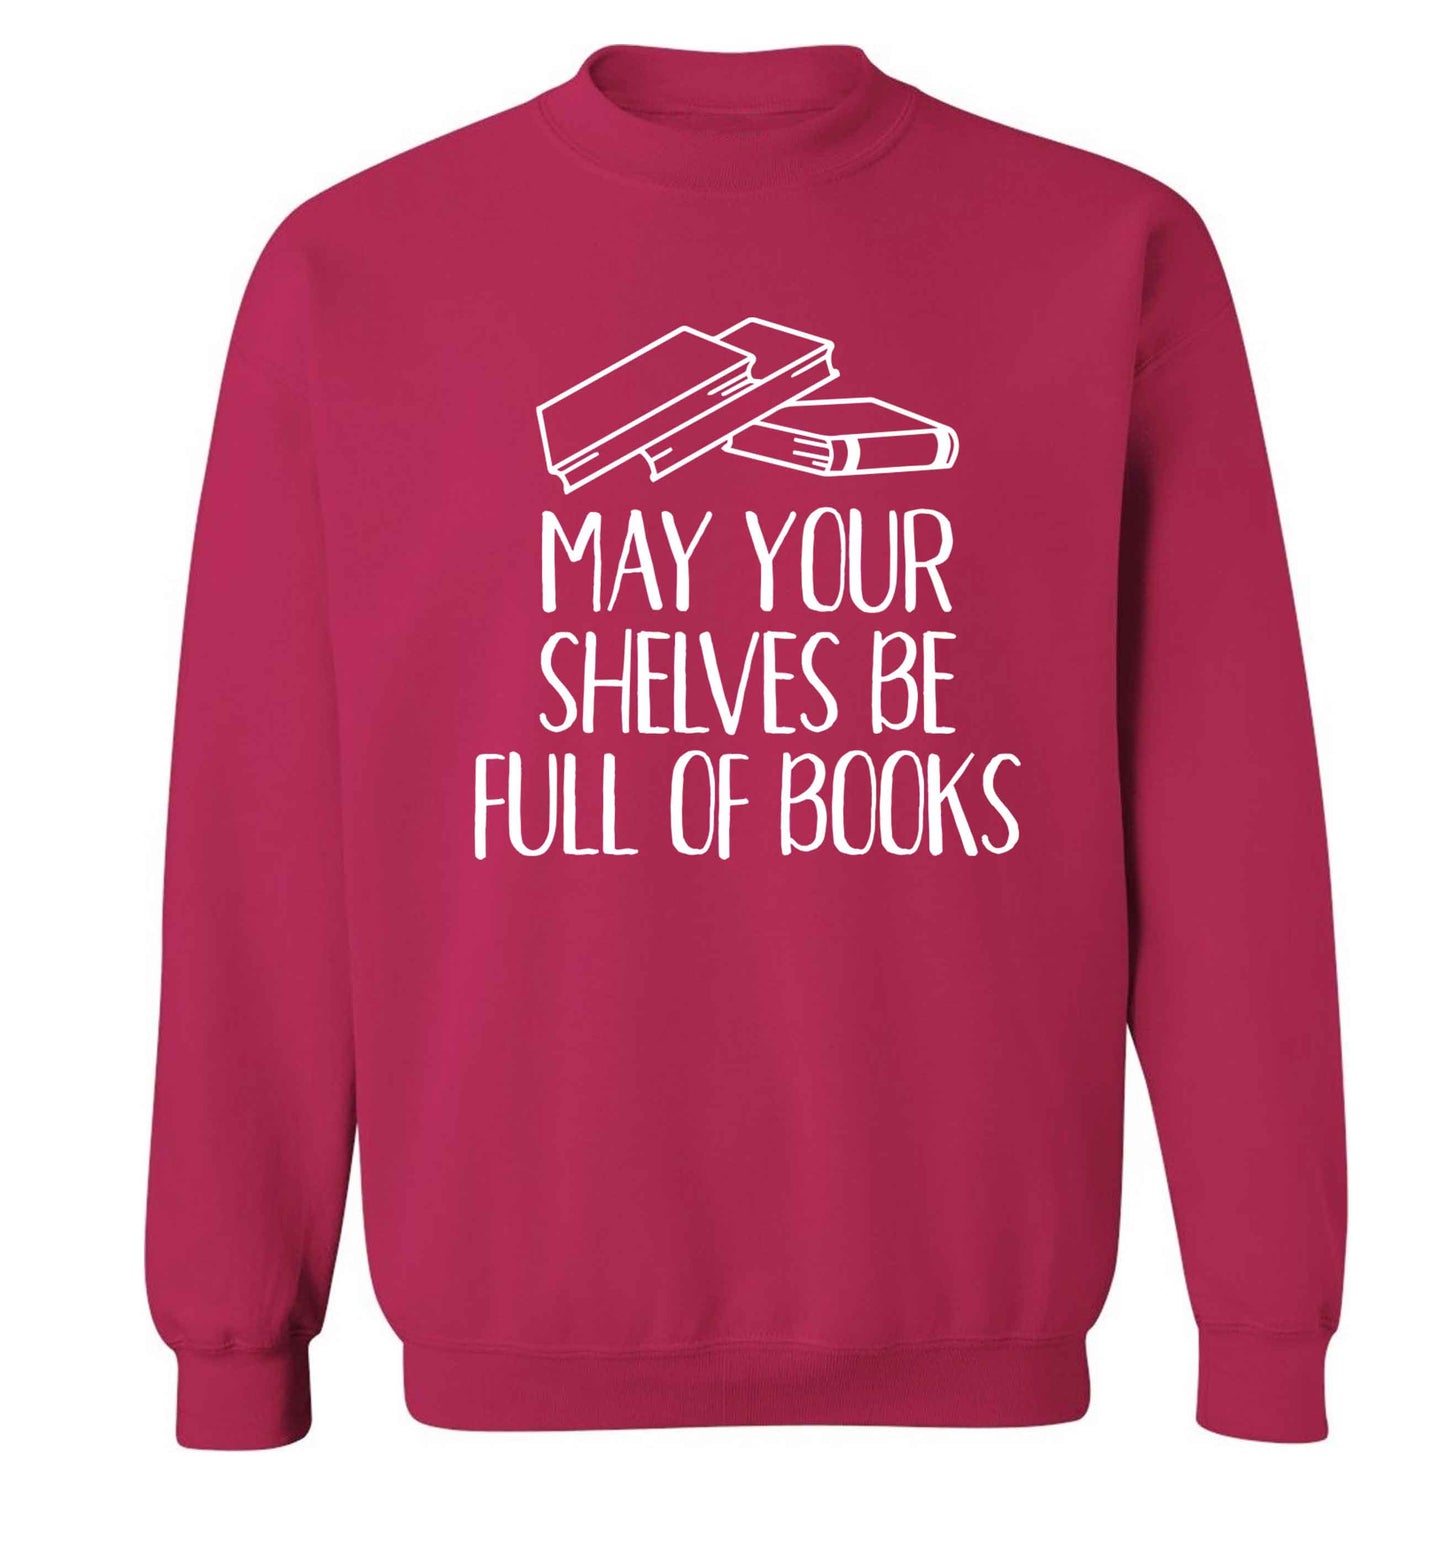 May your shelves be full of books Adult's unisex pink Sweater 2XL